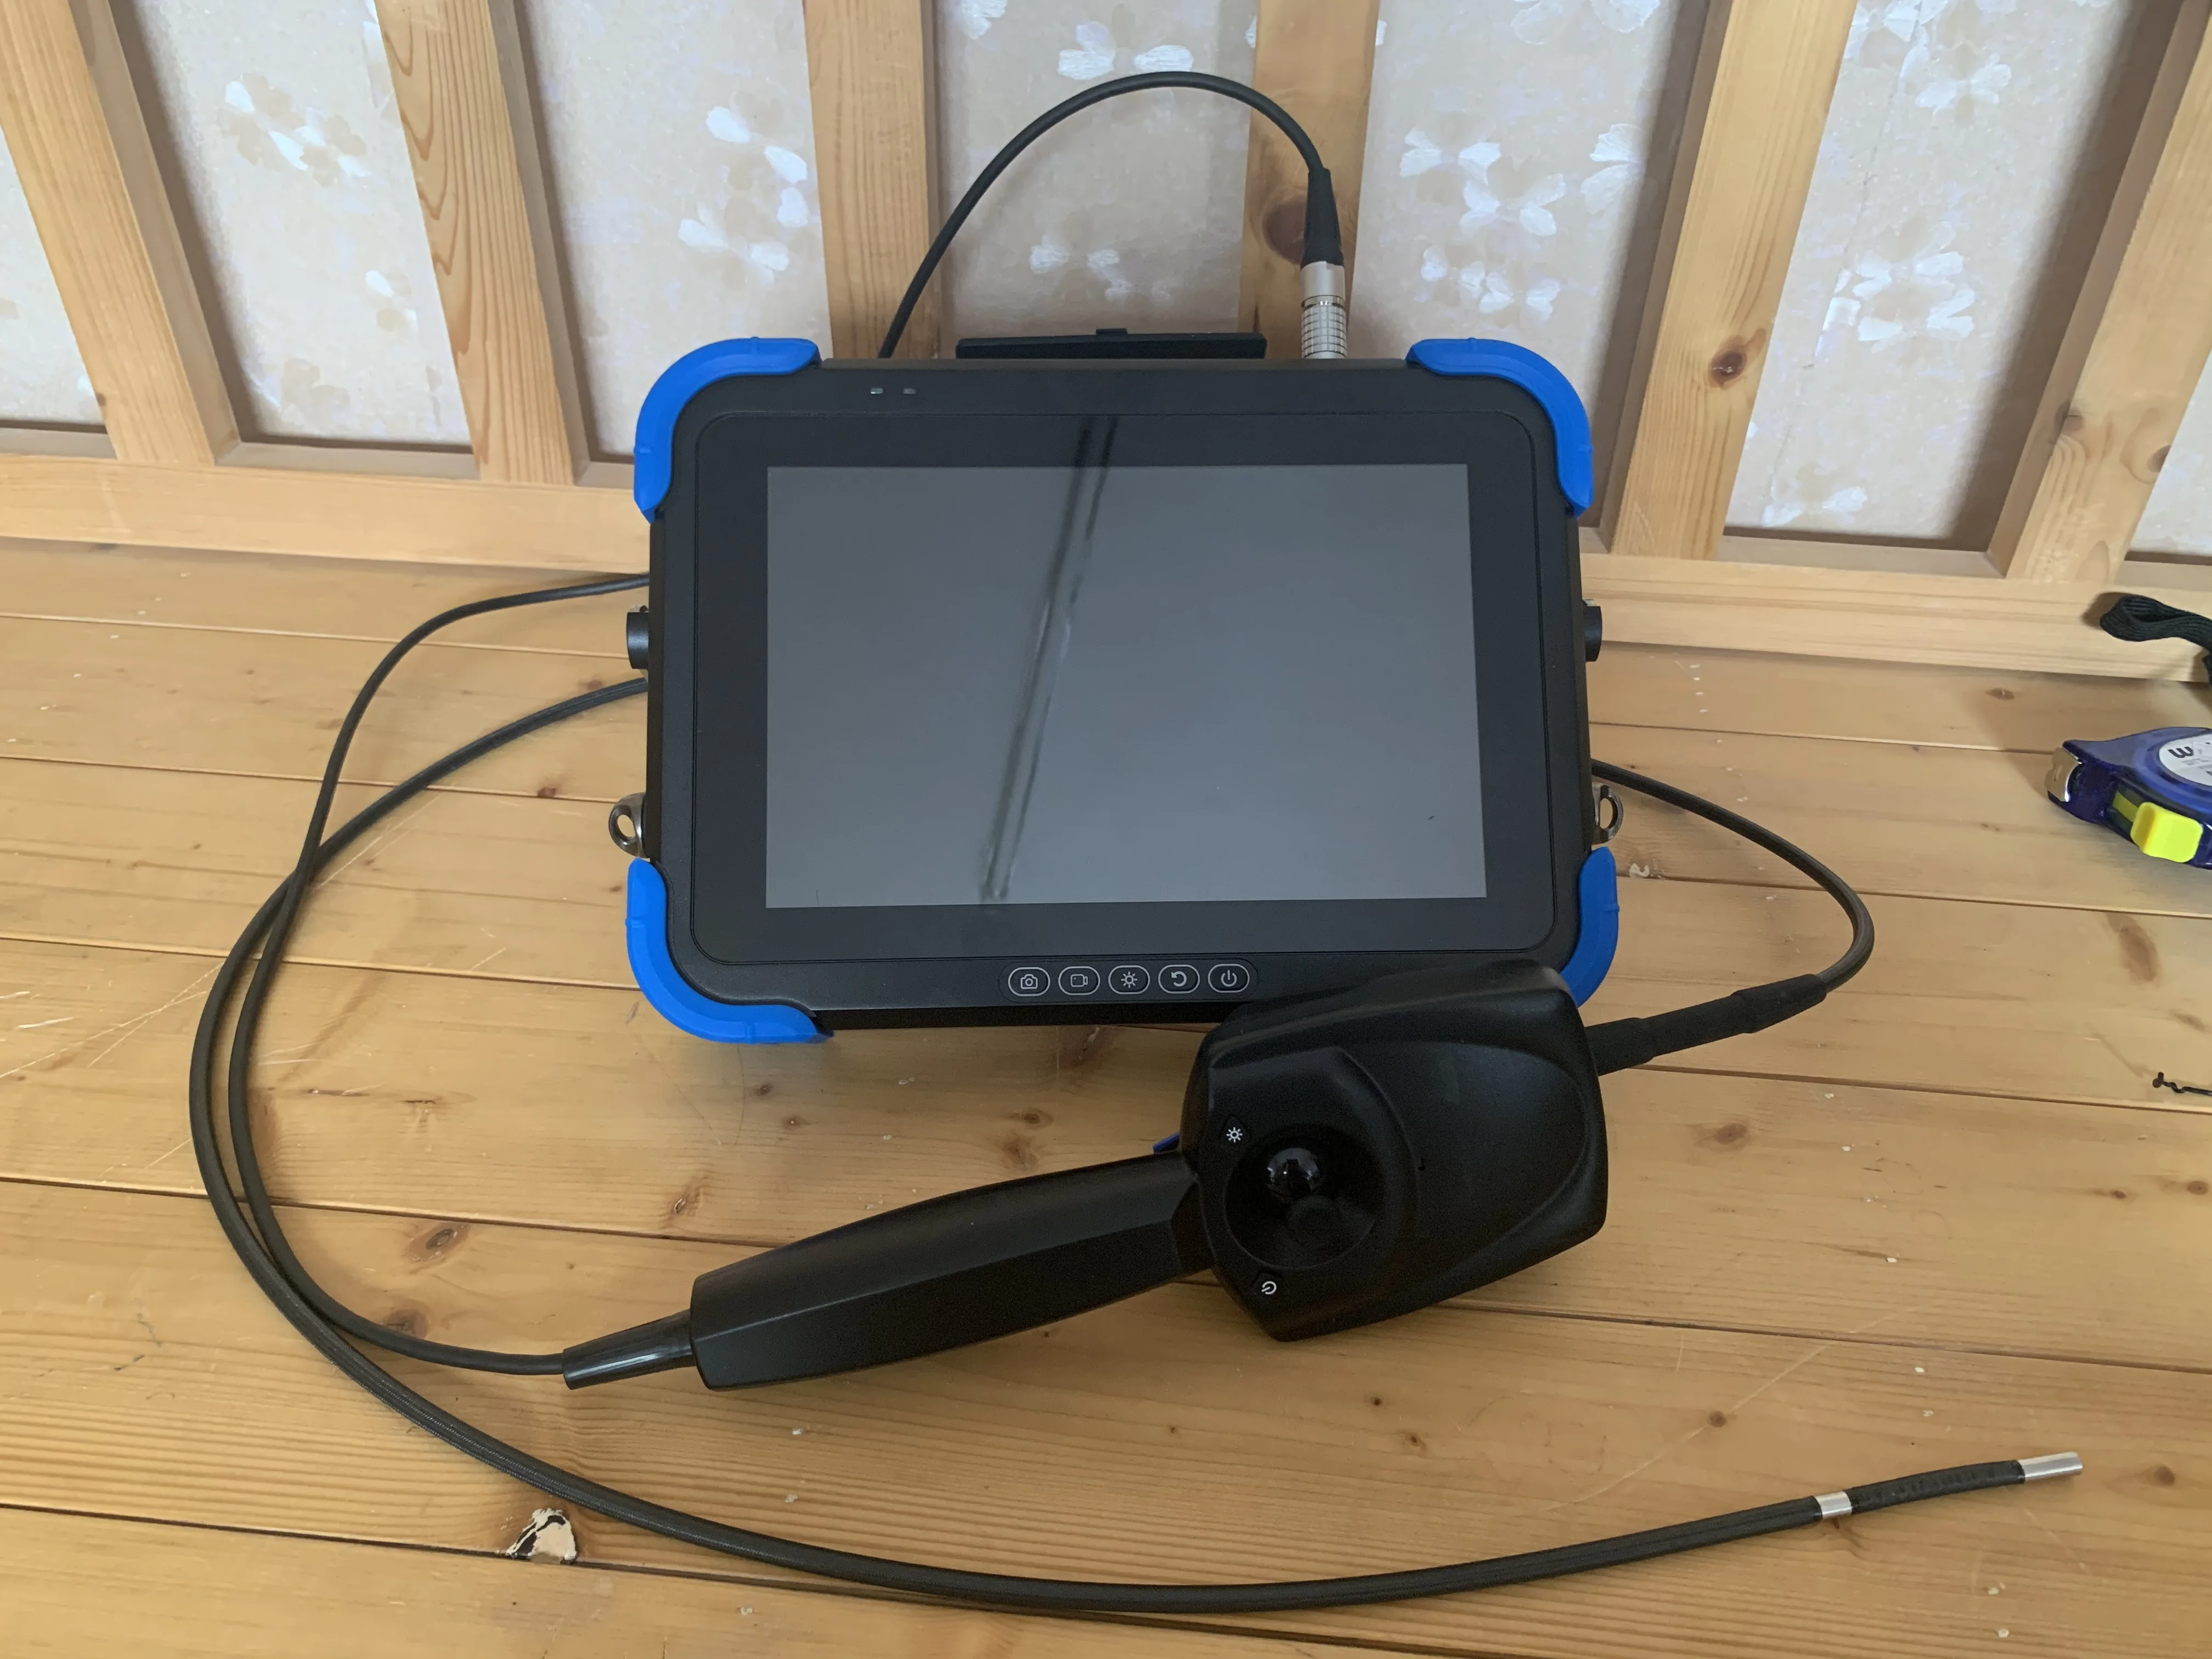 Handheld Industrial Video Borescope with 720P 3D Measure Function, 10.1' LCD,  1.5M Testing Cable Visual Testing